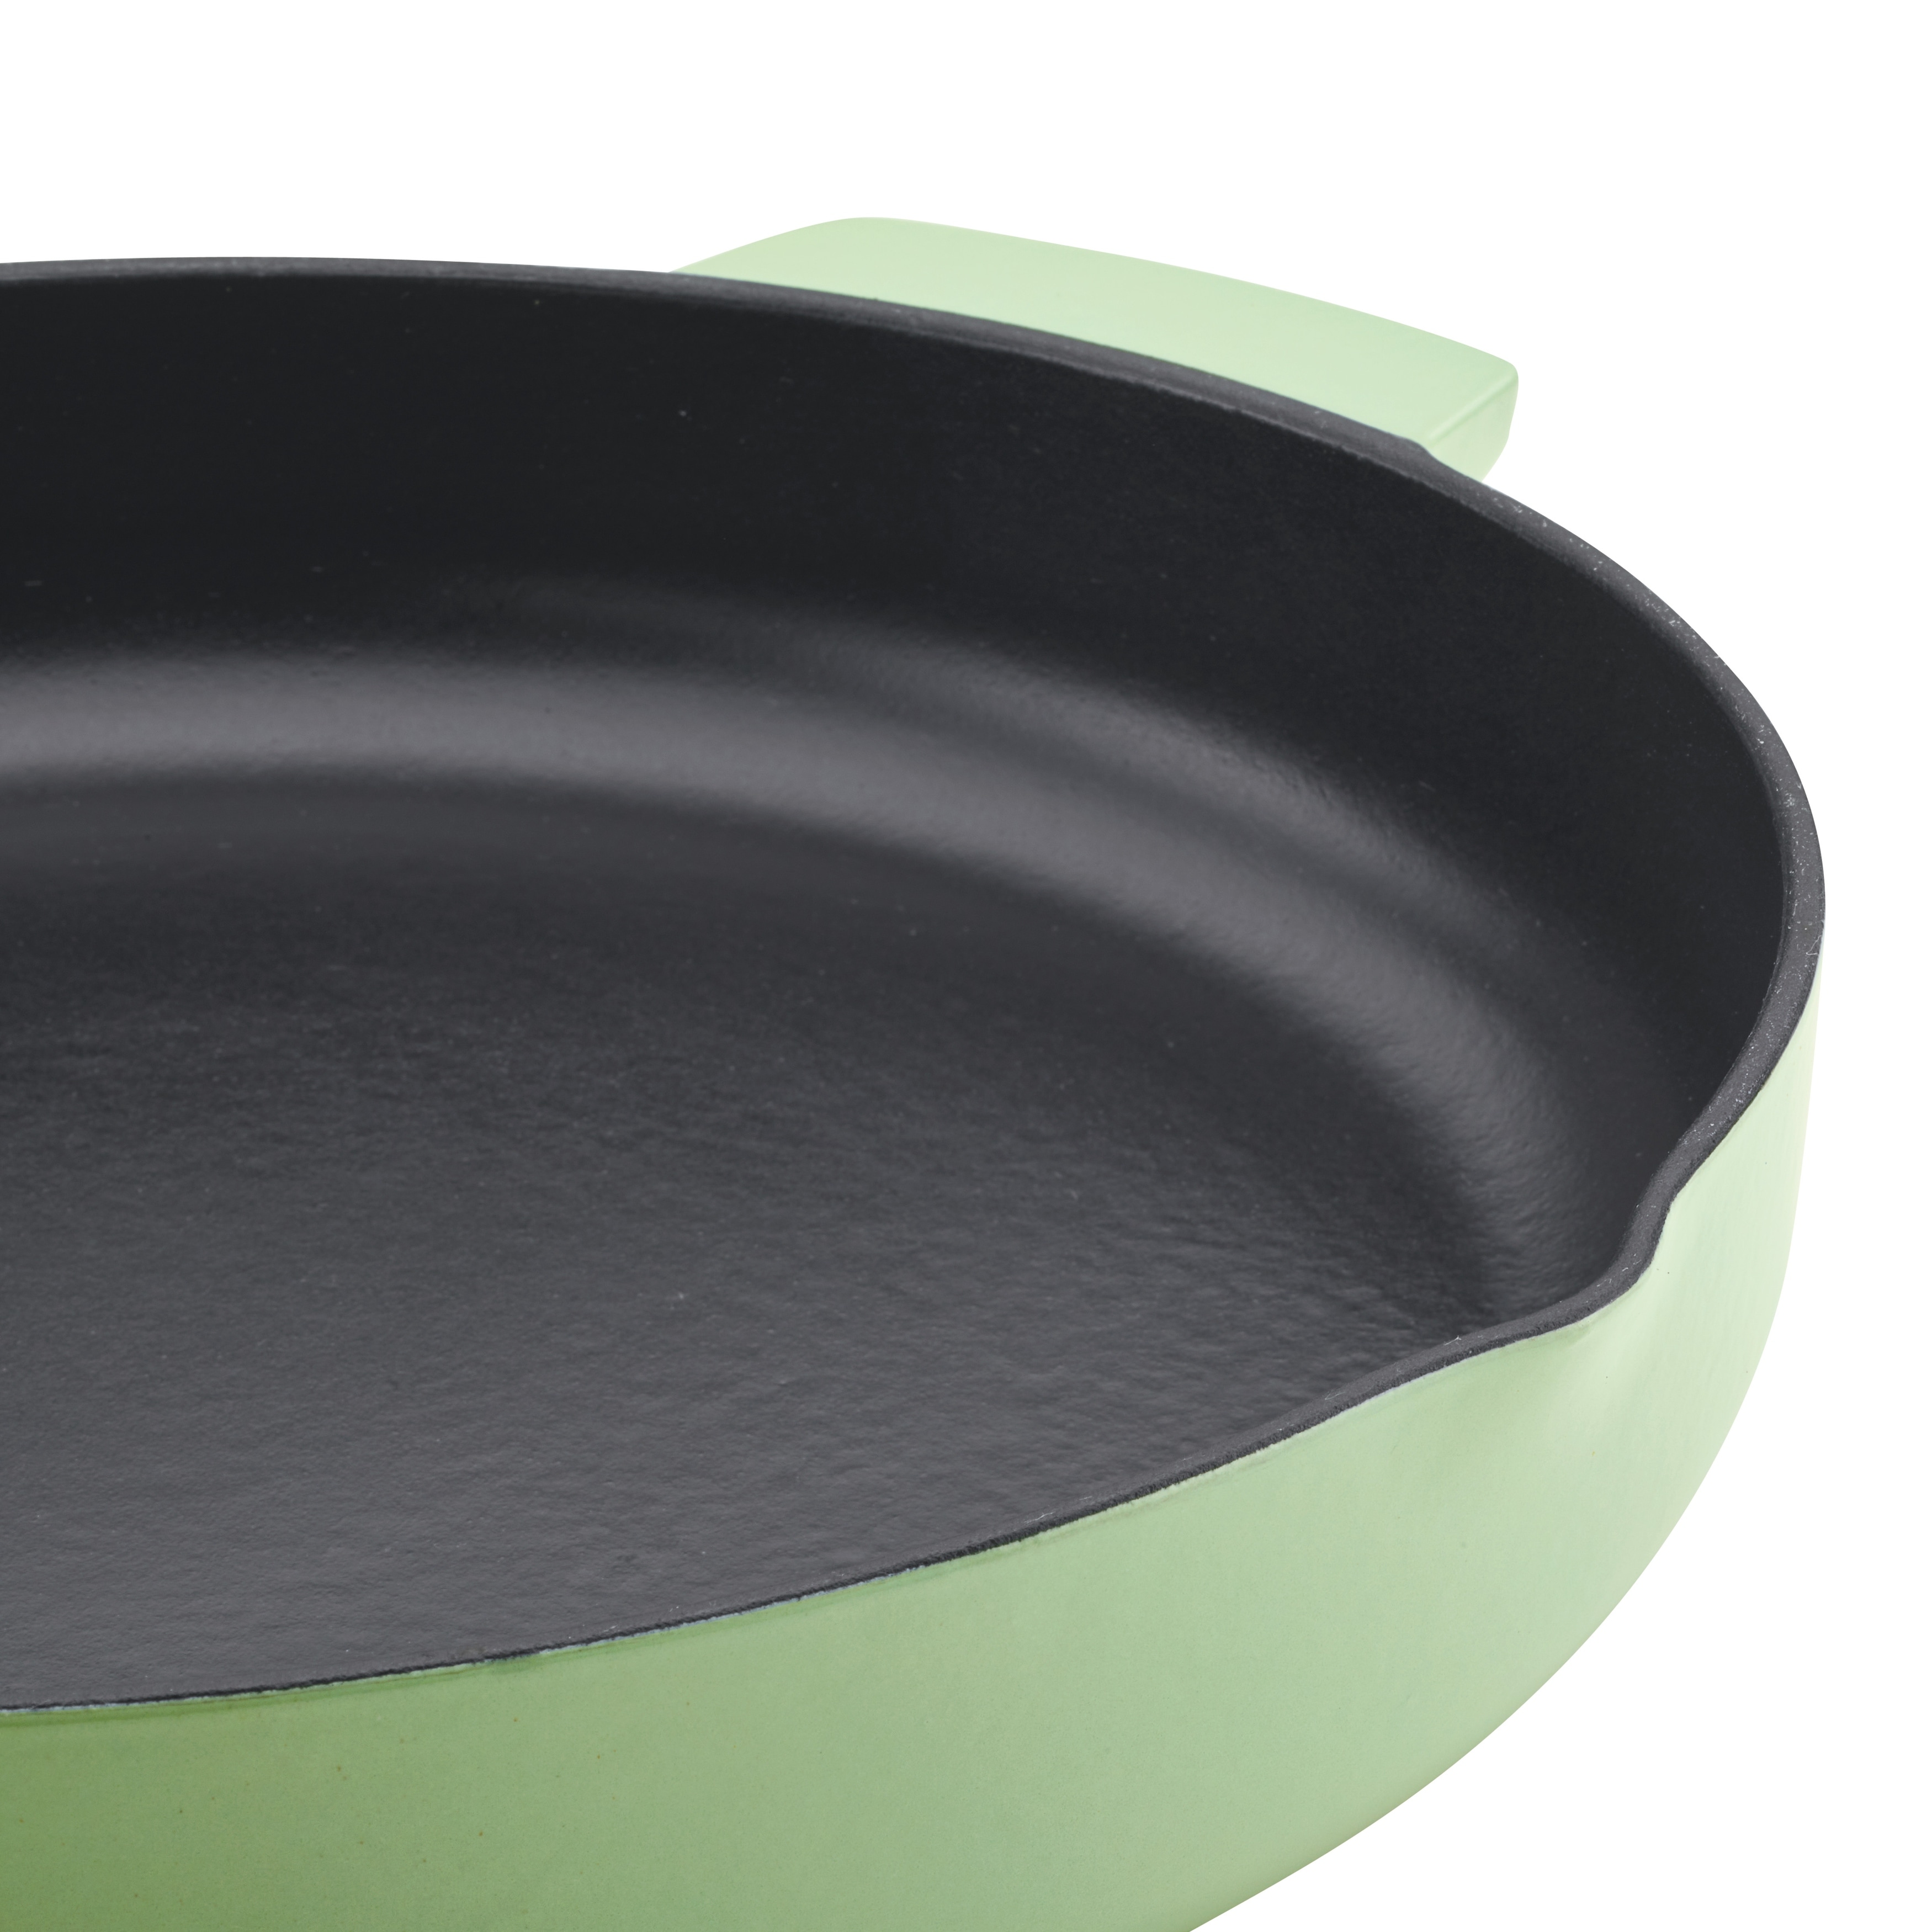 https://ak1.ostkcdn.com/images/products/is/images/direct/11ace68e4cee3a171b2bab14423833420a7361fa/KitchenAid-Enameled-Cast-Iron-Induction-Skillet-with-Helper-Handle-and-Pour-Spouts%2C-12-Inch%2C-Blue-Velvet.jpg